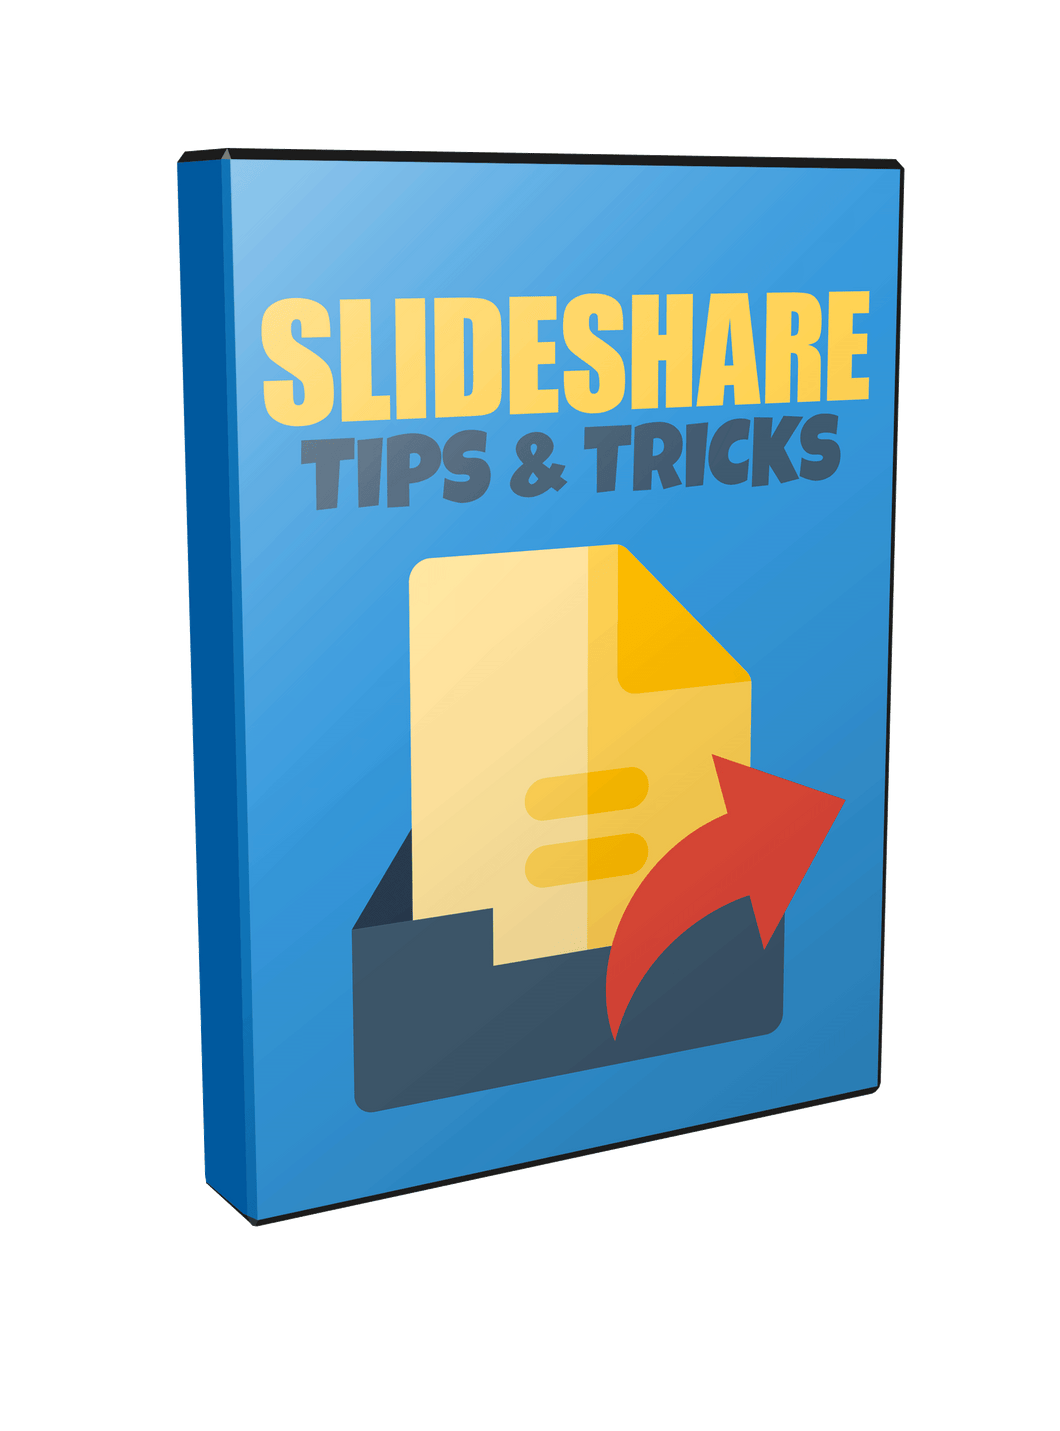 SlideShare Traffic Videos - Presentations for Your Business